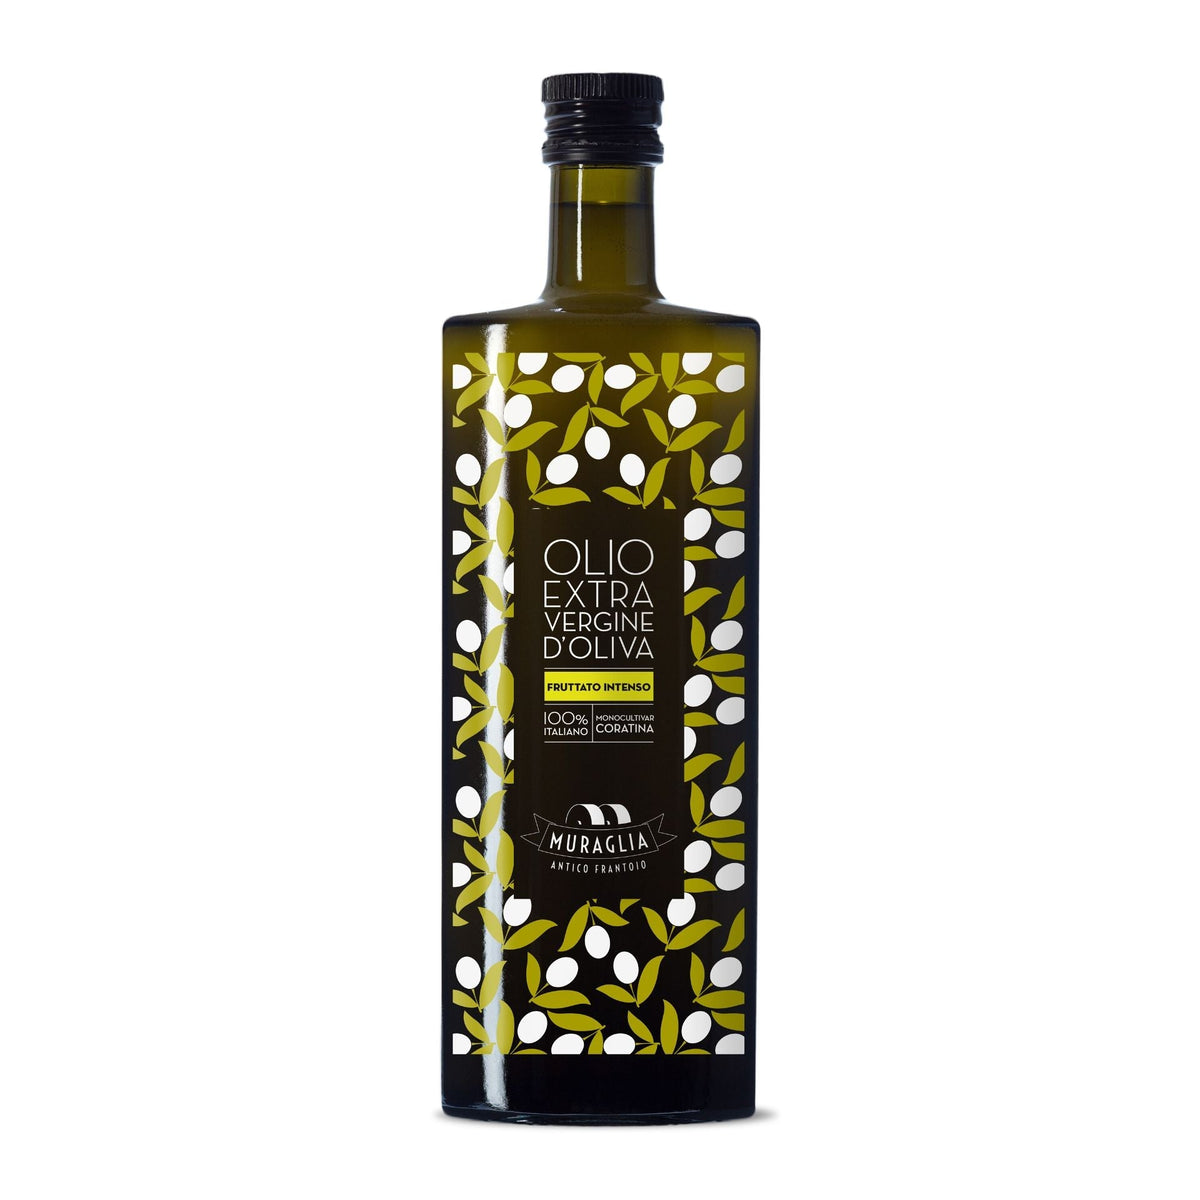 Frantoio Muraglia Intense Fruity Coratina Extra Virgin Olive Oil 500ml  | Imported and distributed in the UK by Just Gourmet Foods